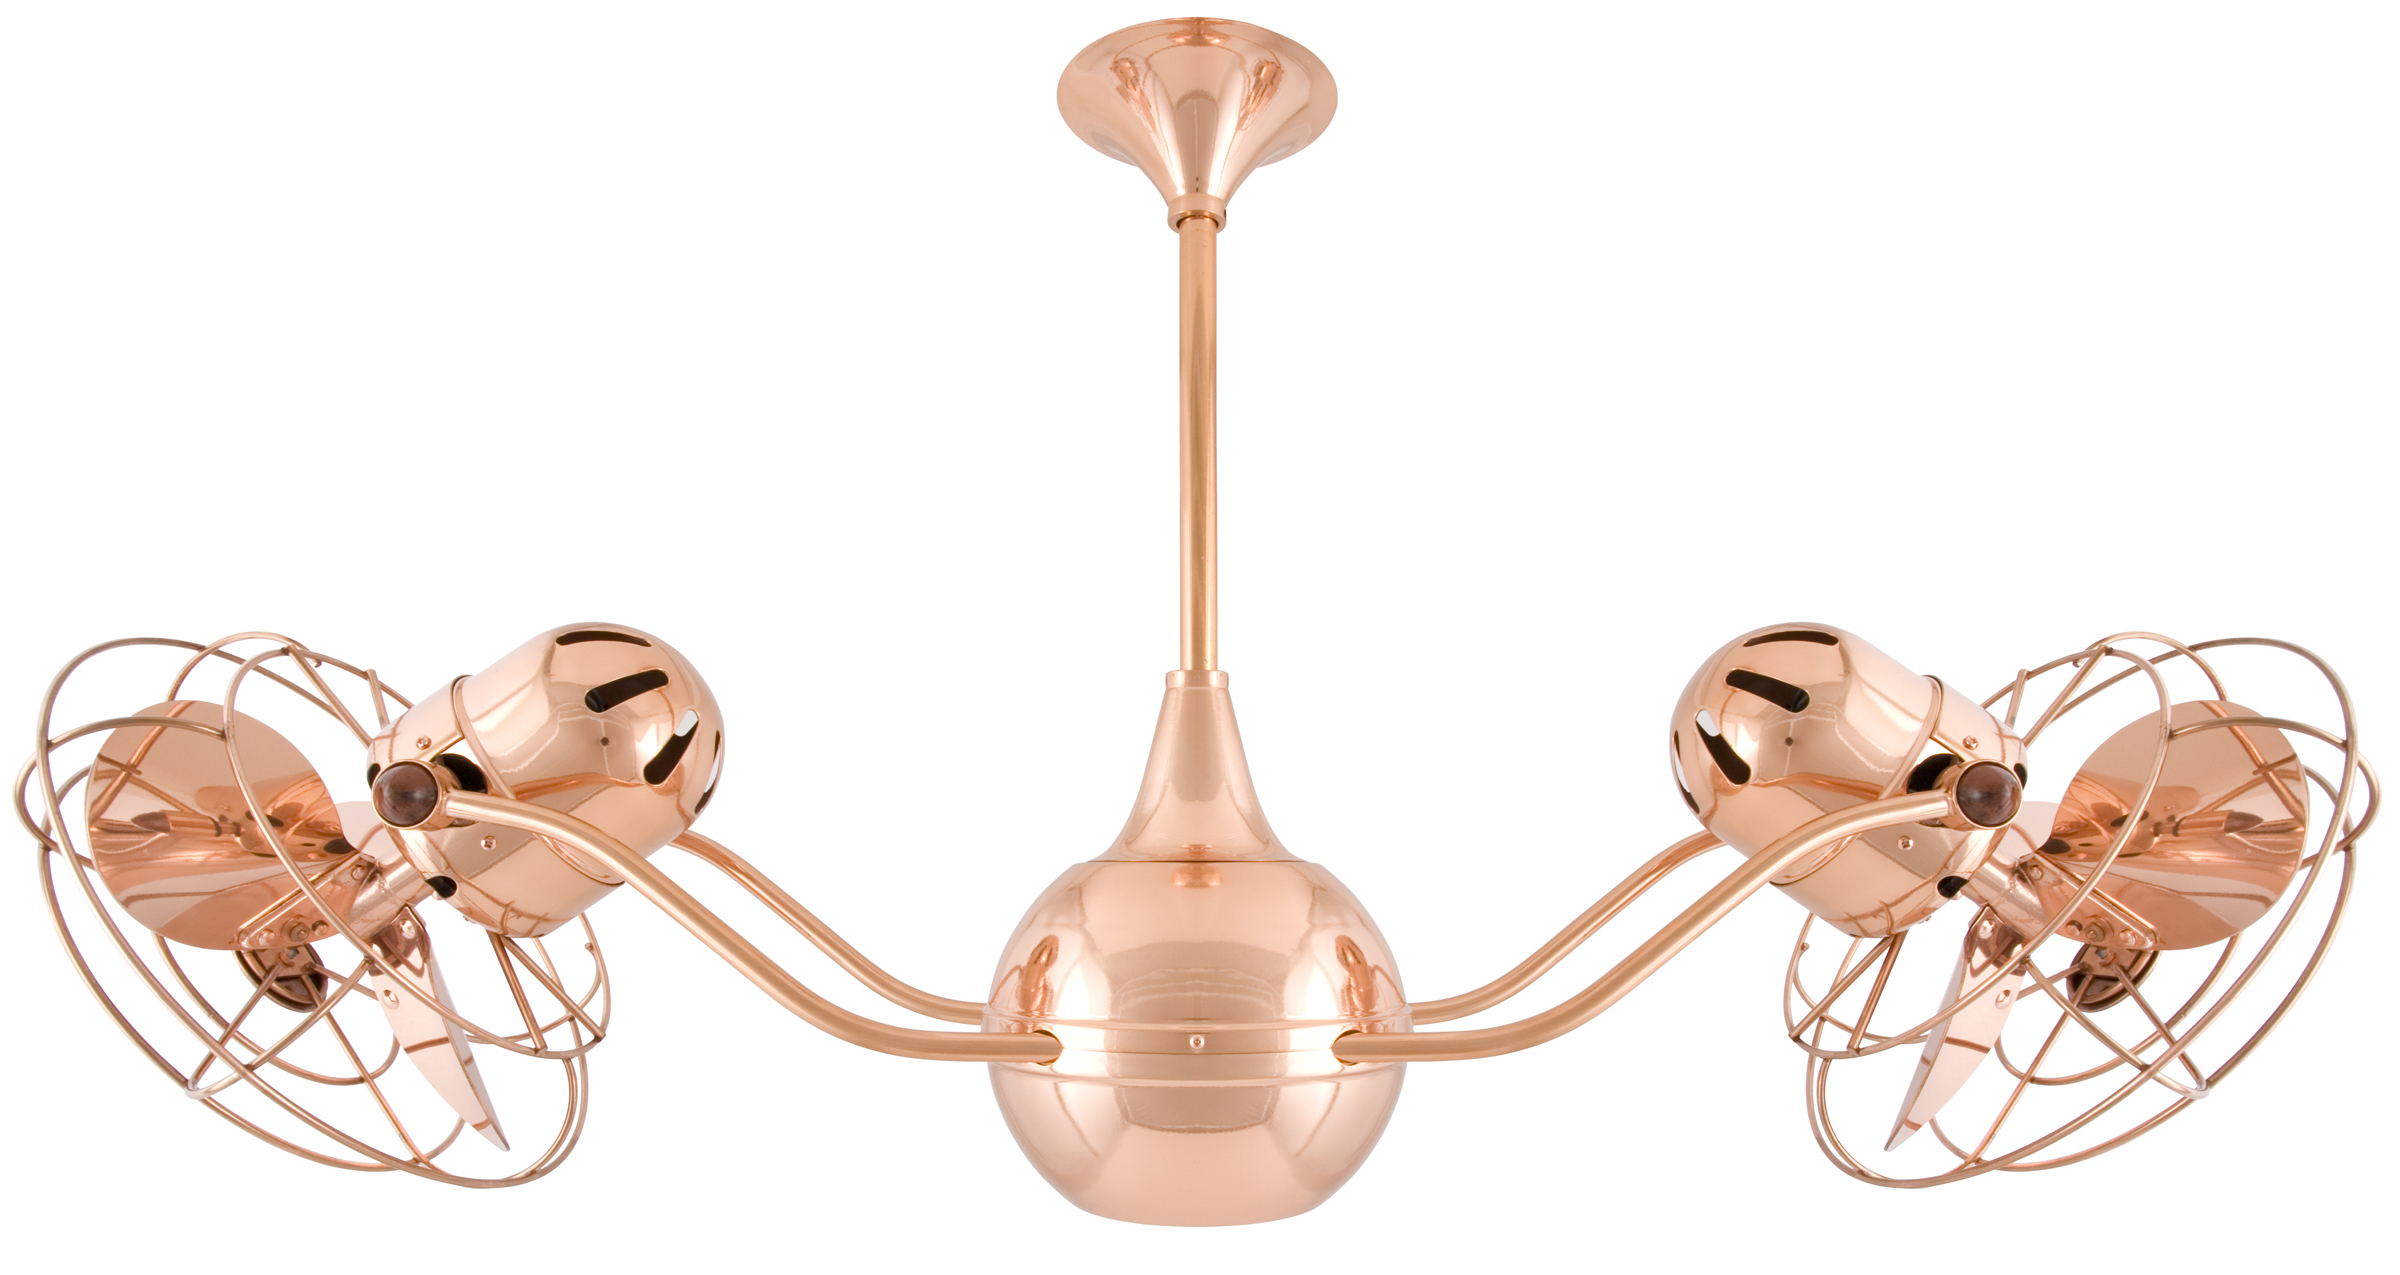 Vent-Bettina Rotational Dual Head Ceiling Fan in Polished Copper Finish with Metal Blades and Decorative Cage